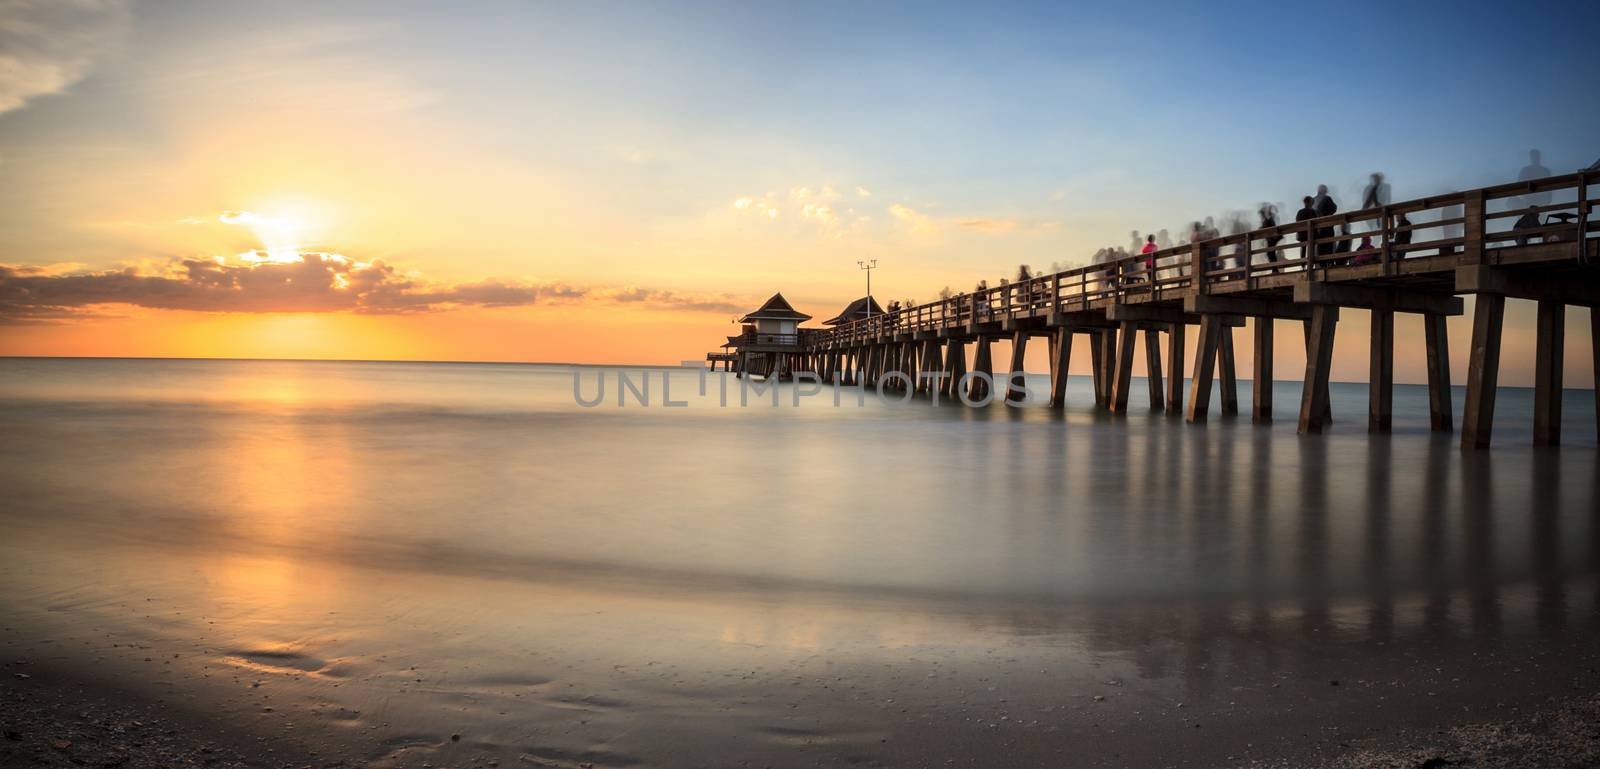 Naples Pier on the beach at sunset by steffstarr